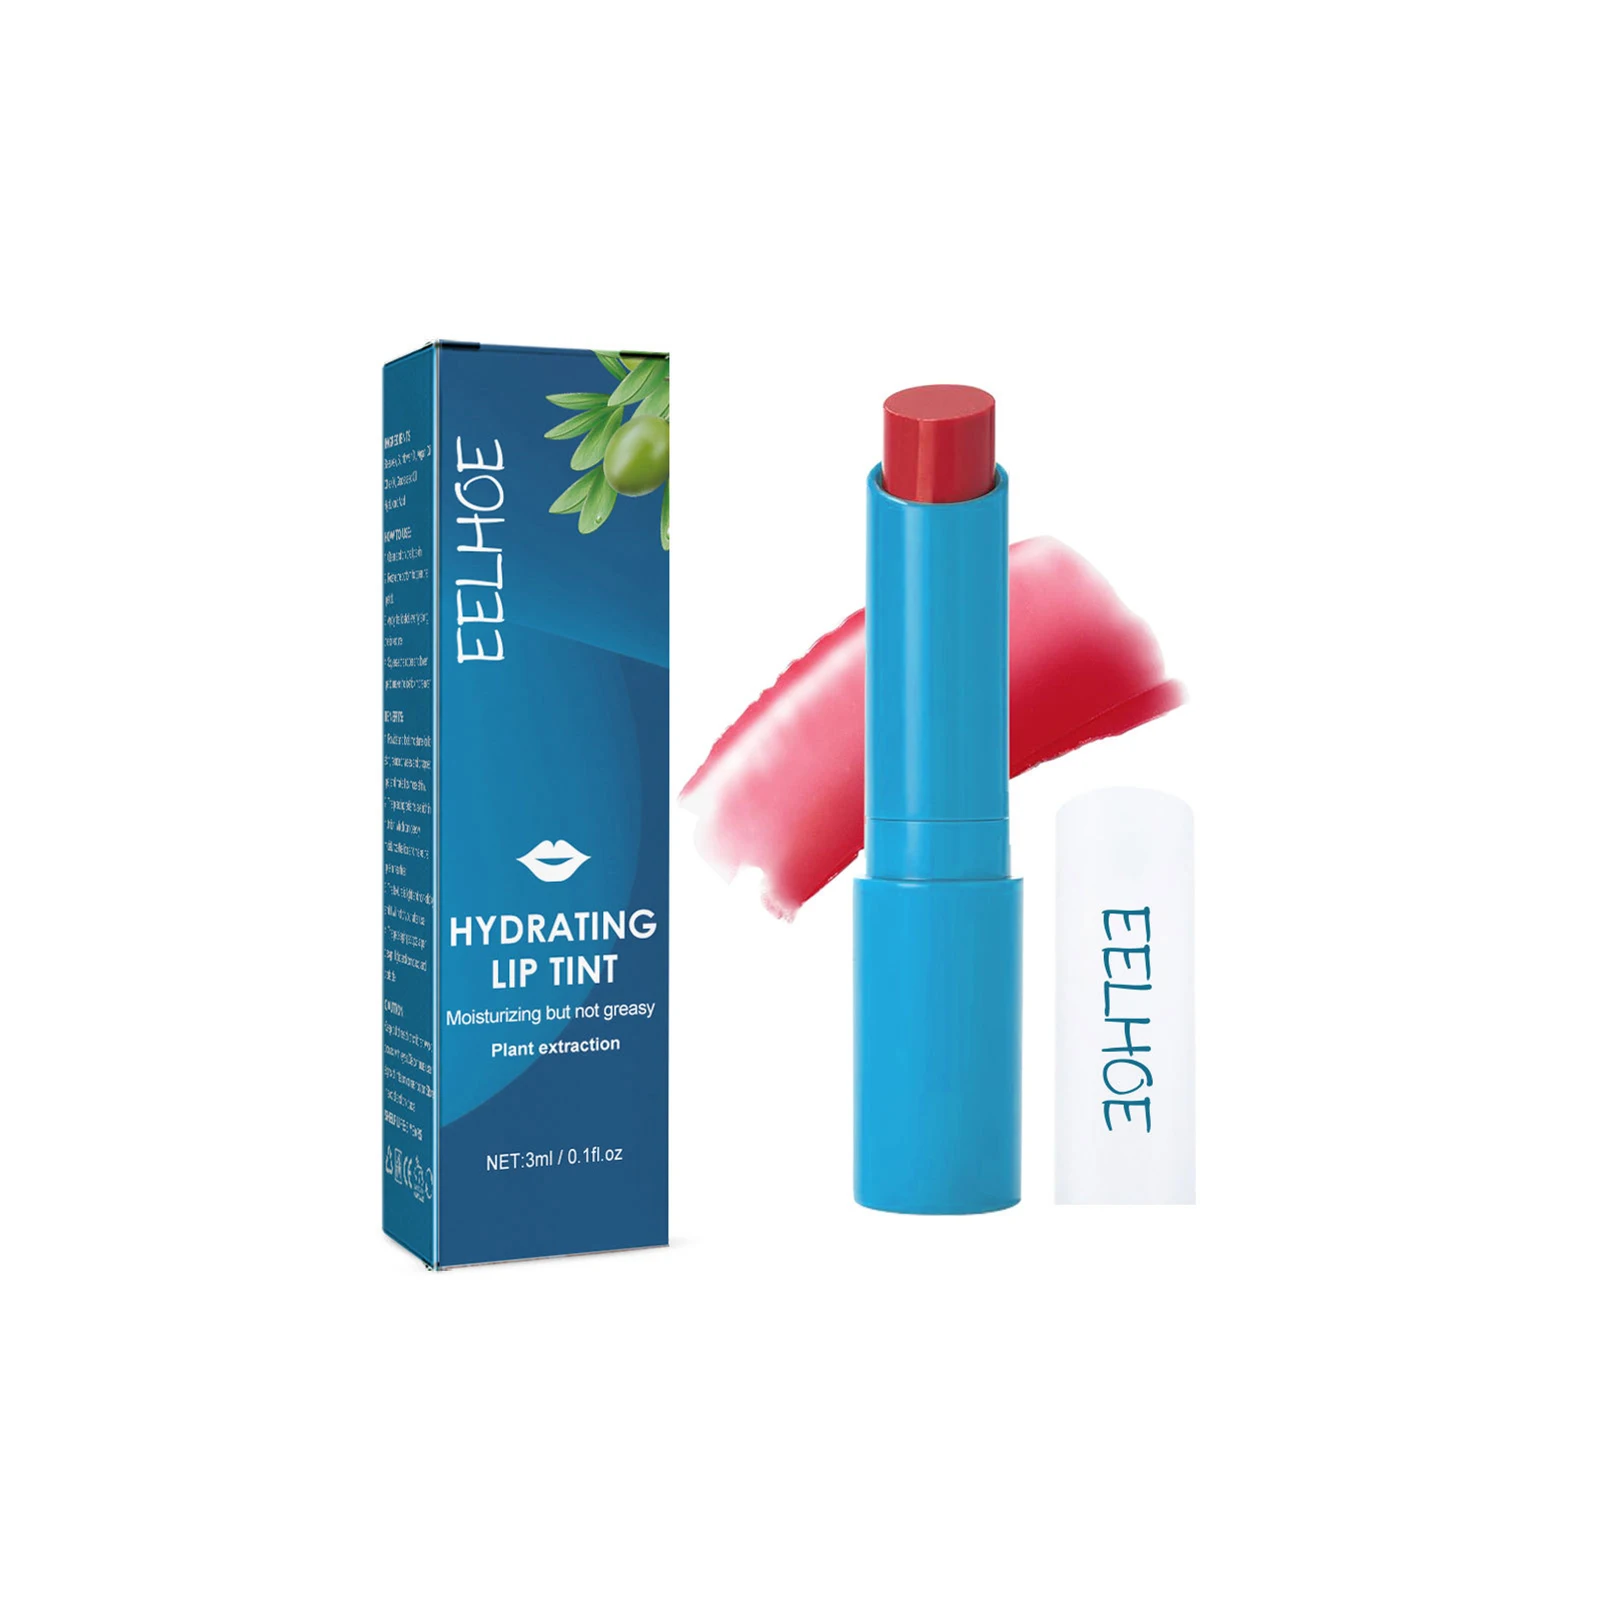 

Hydrating Repairing Lip Tint Refreshing Soothing Eliminate Lip Lines Lip Balm for Daytime Nighttime Lips Care